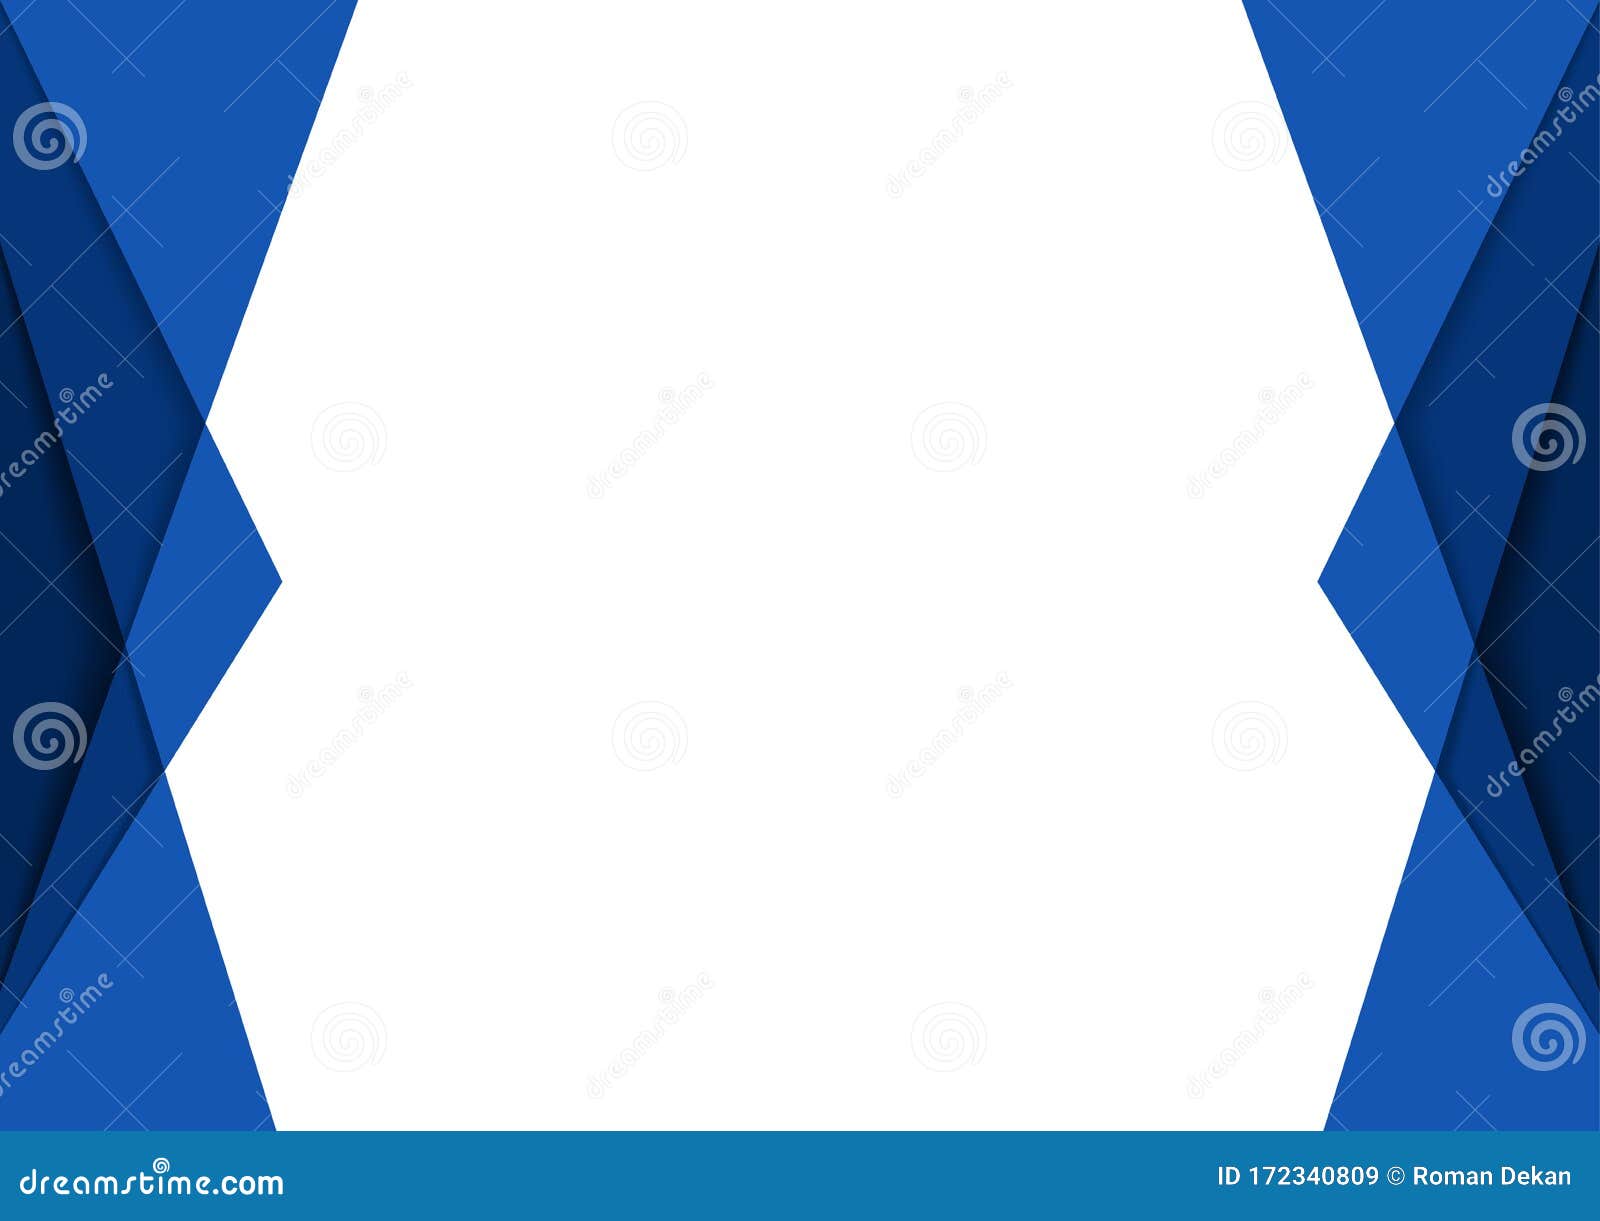 Blue Geometric Background with Layers and Shadows Stock Vector -  Illustration of edge, element: 172340809